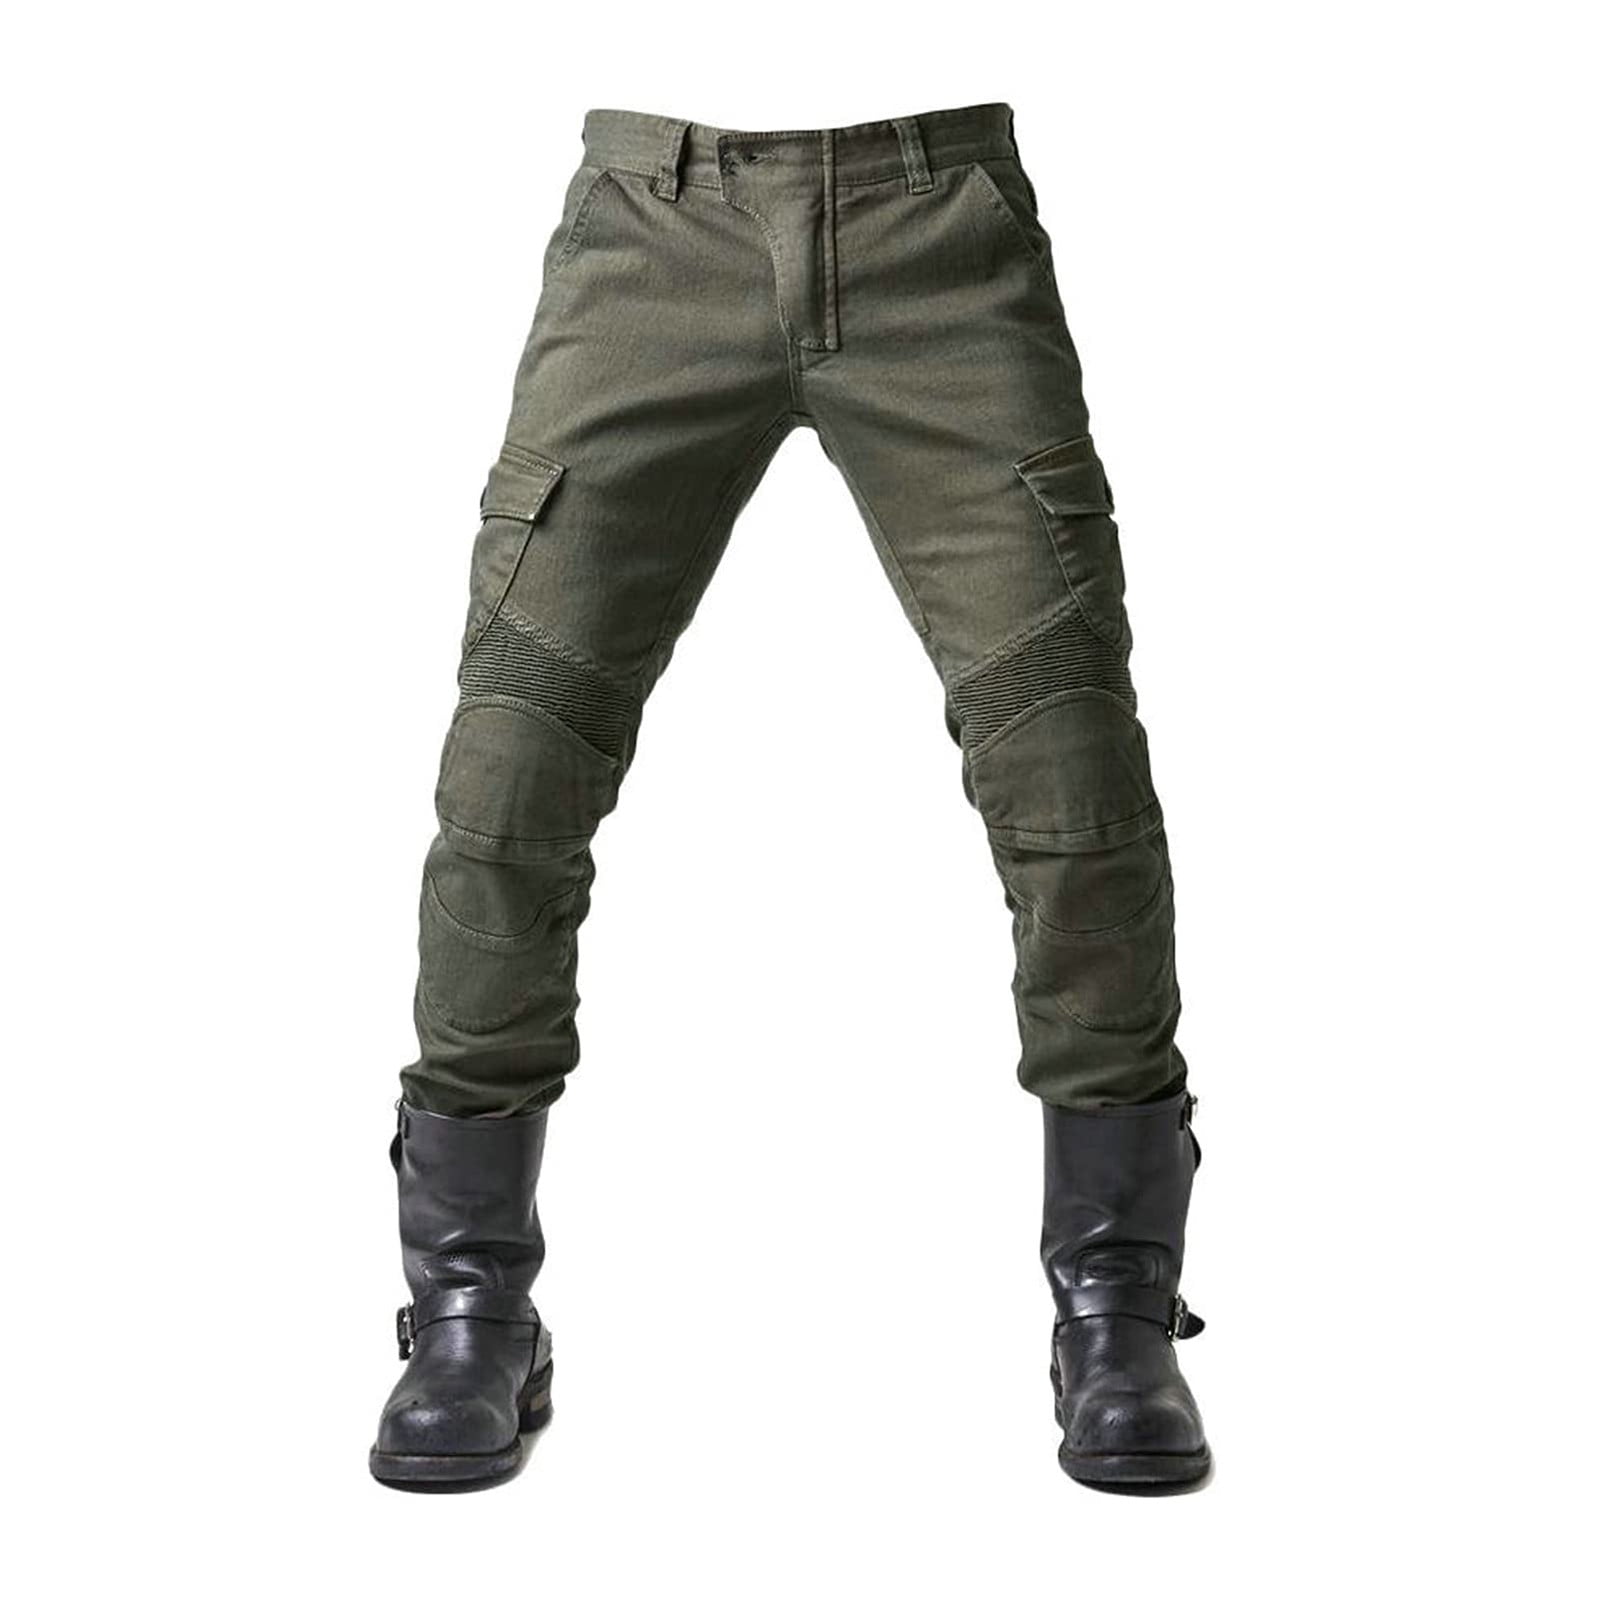 EKOUSN Motorcycle Pants for Men and Women with Water Resistant Cordura ...